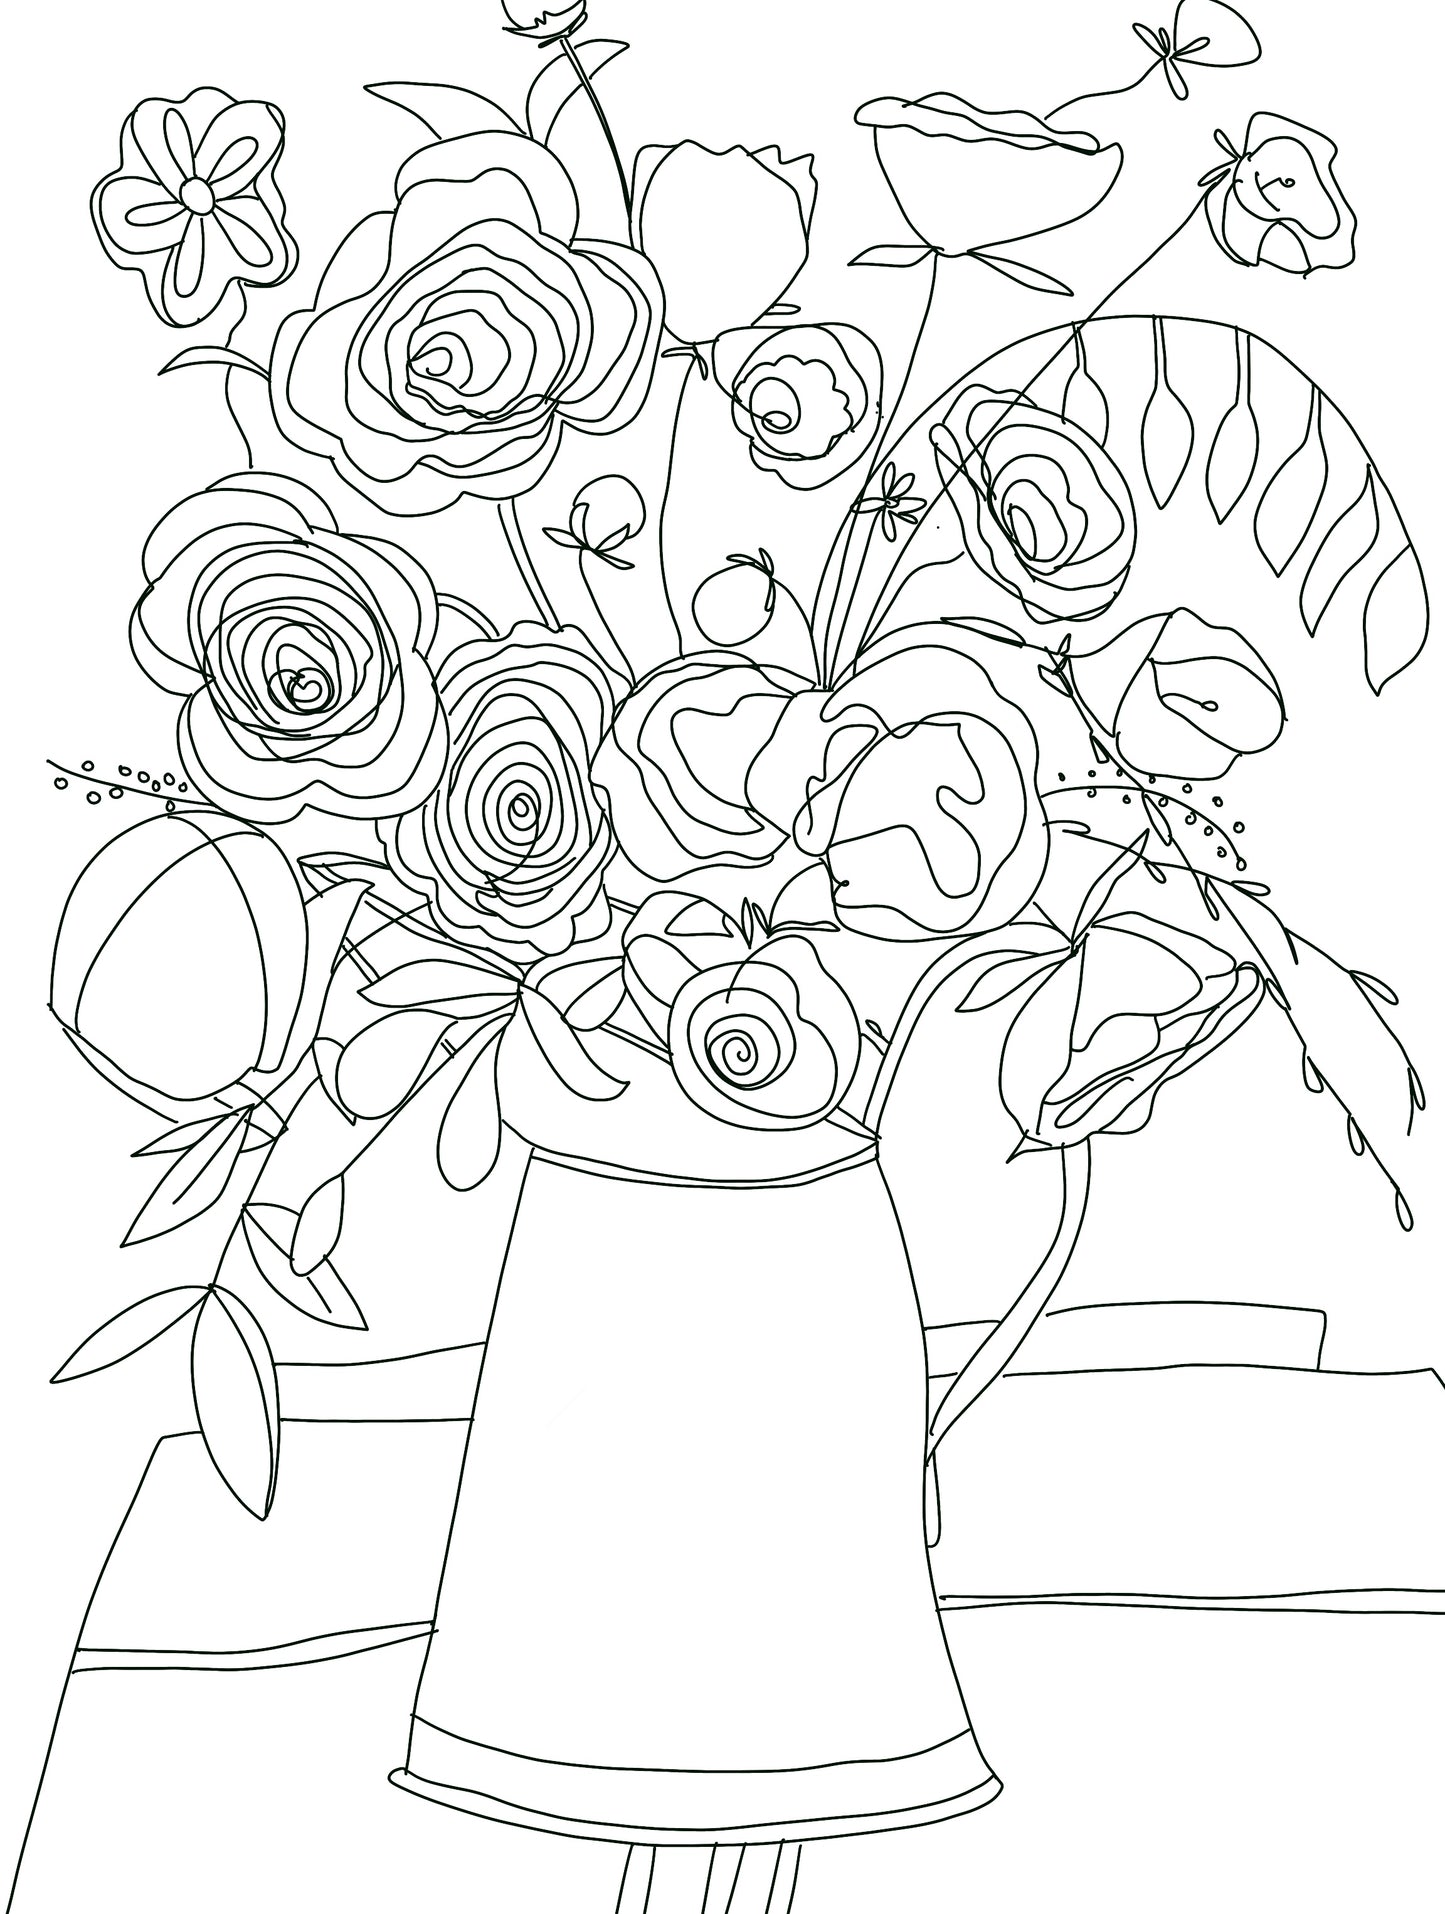 Flowers in a Watering Can Digital Coloring Page for ProCreate